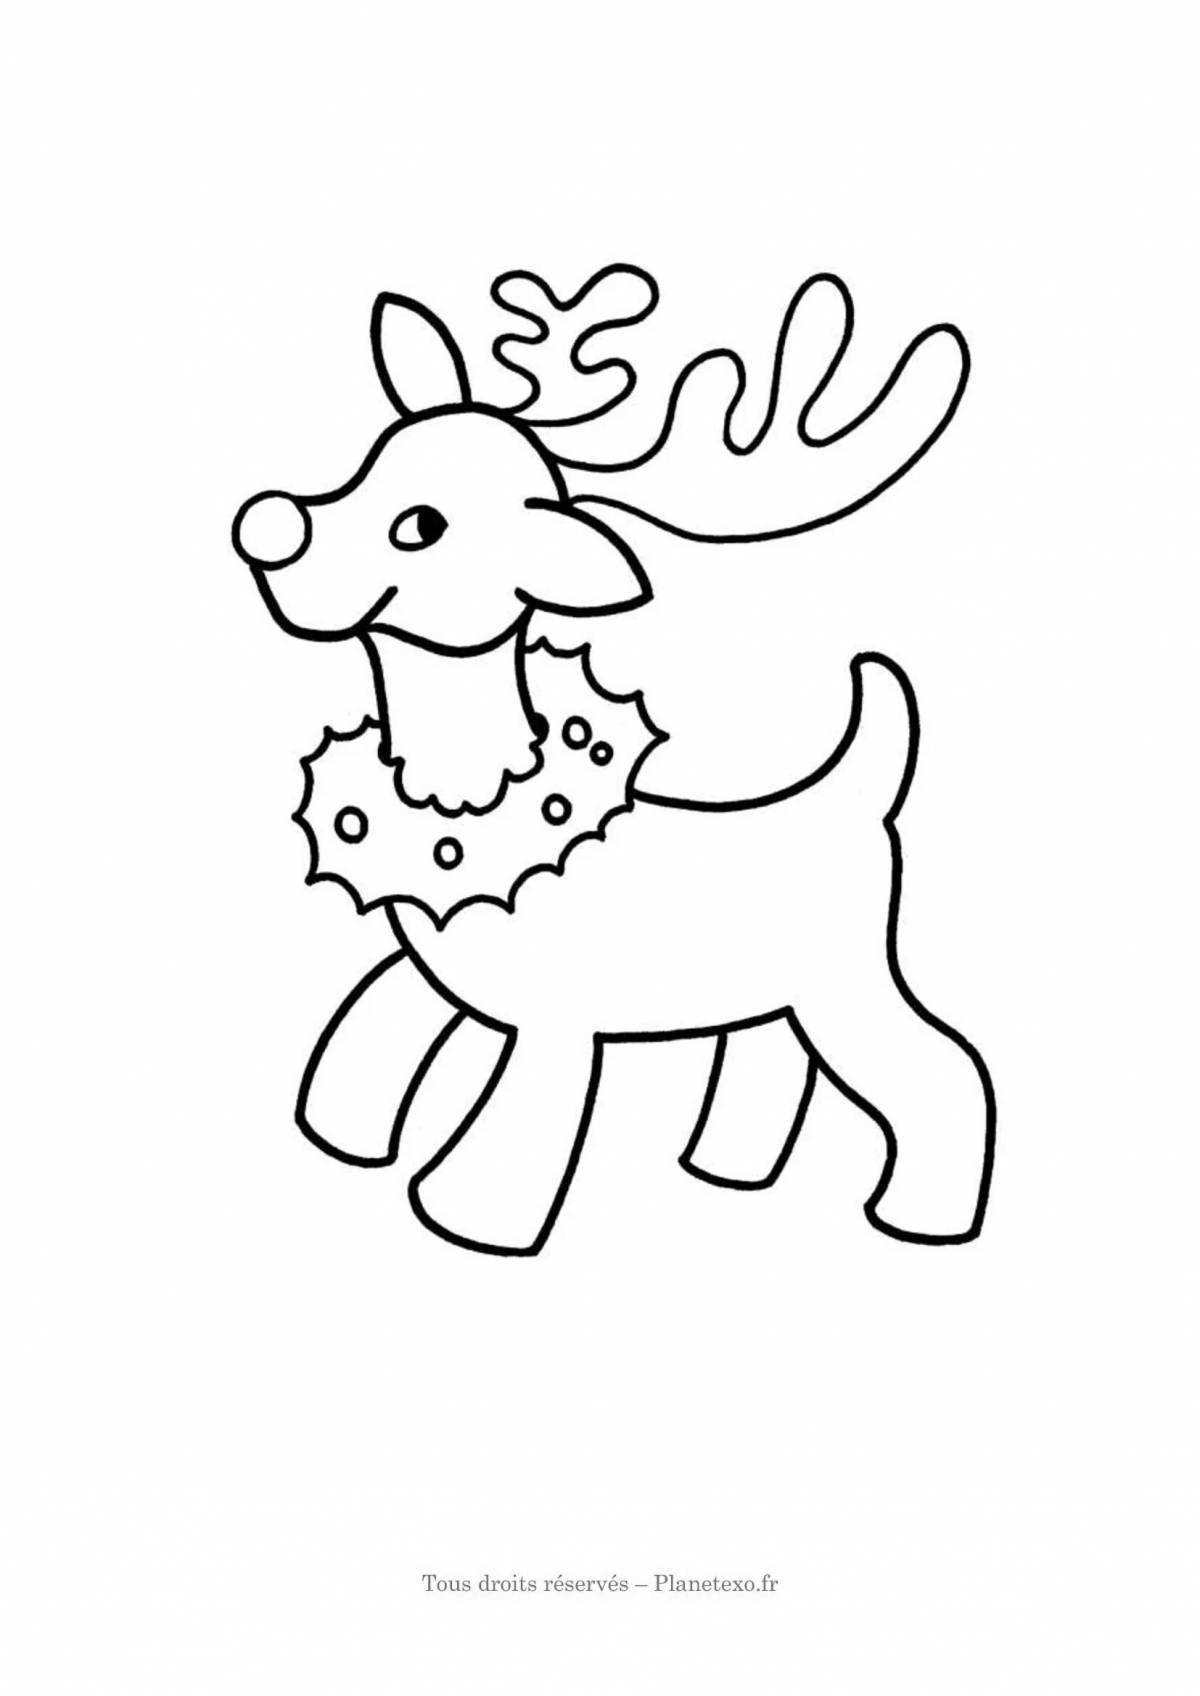 Christmas deer coloring pages for kids